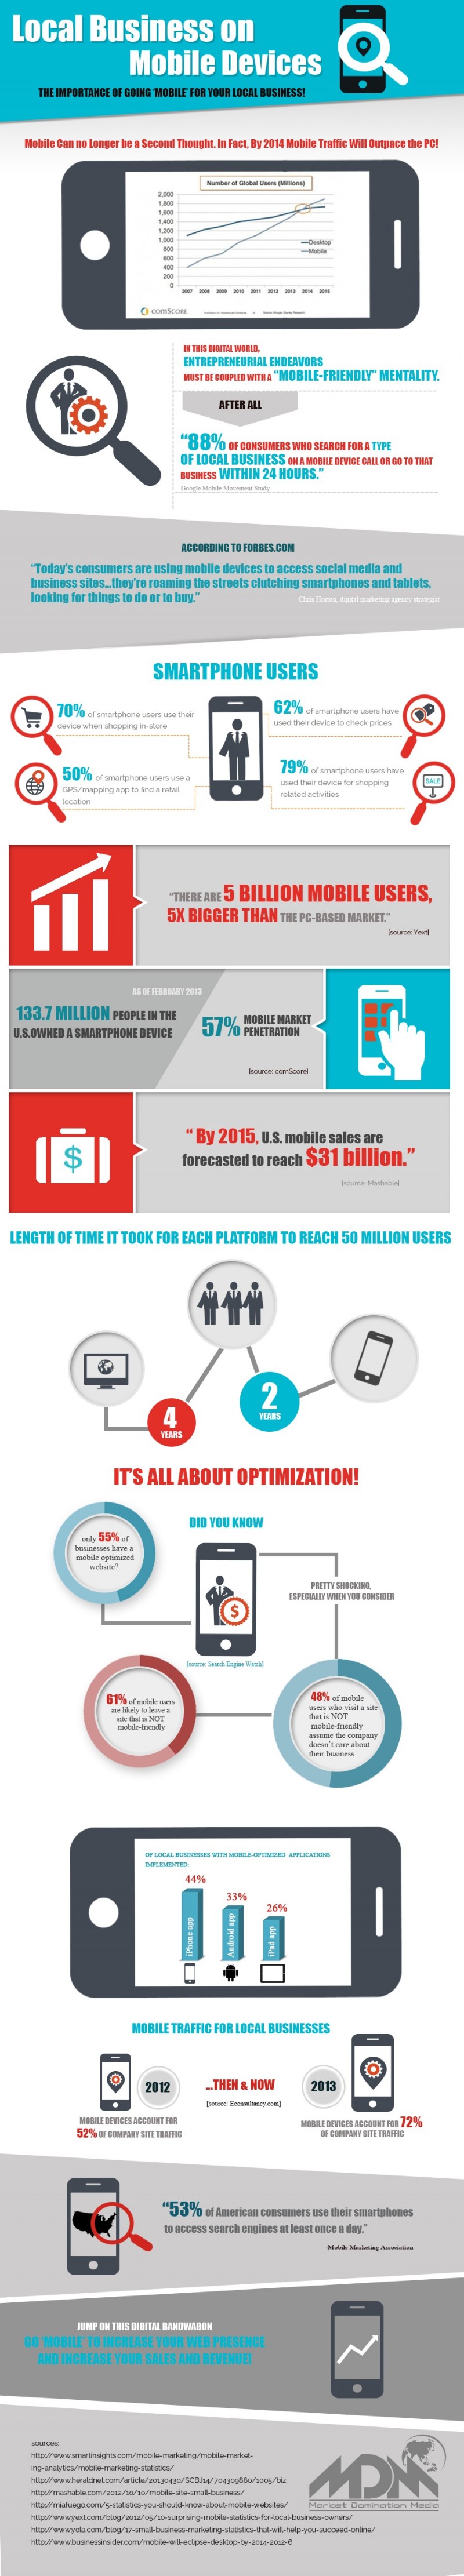 Why Your Business Needs To Be Found On Mobile Devices [Infographic]